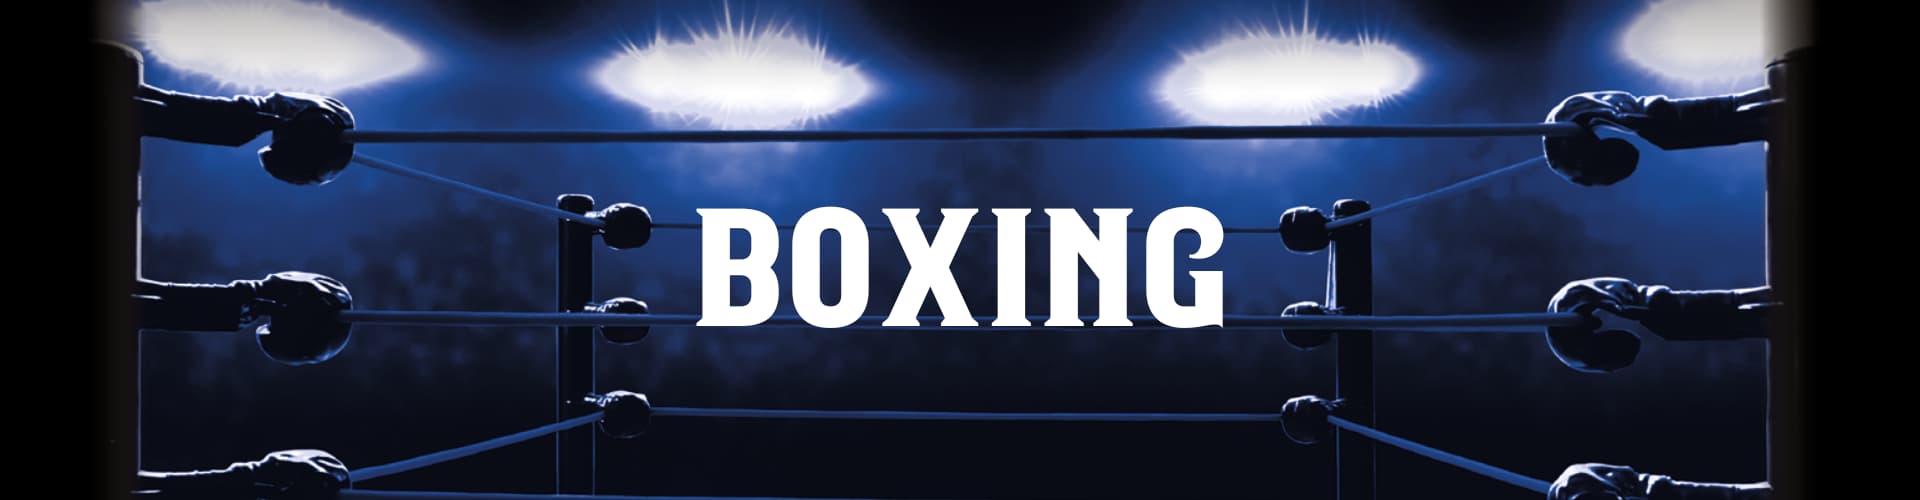 Watch Live Boxing in Doncaster at The Hatfield Chace Pub